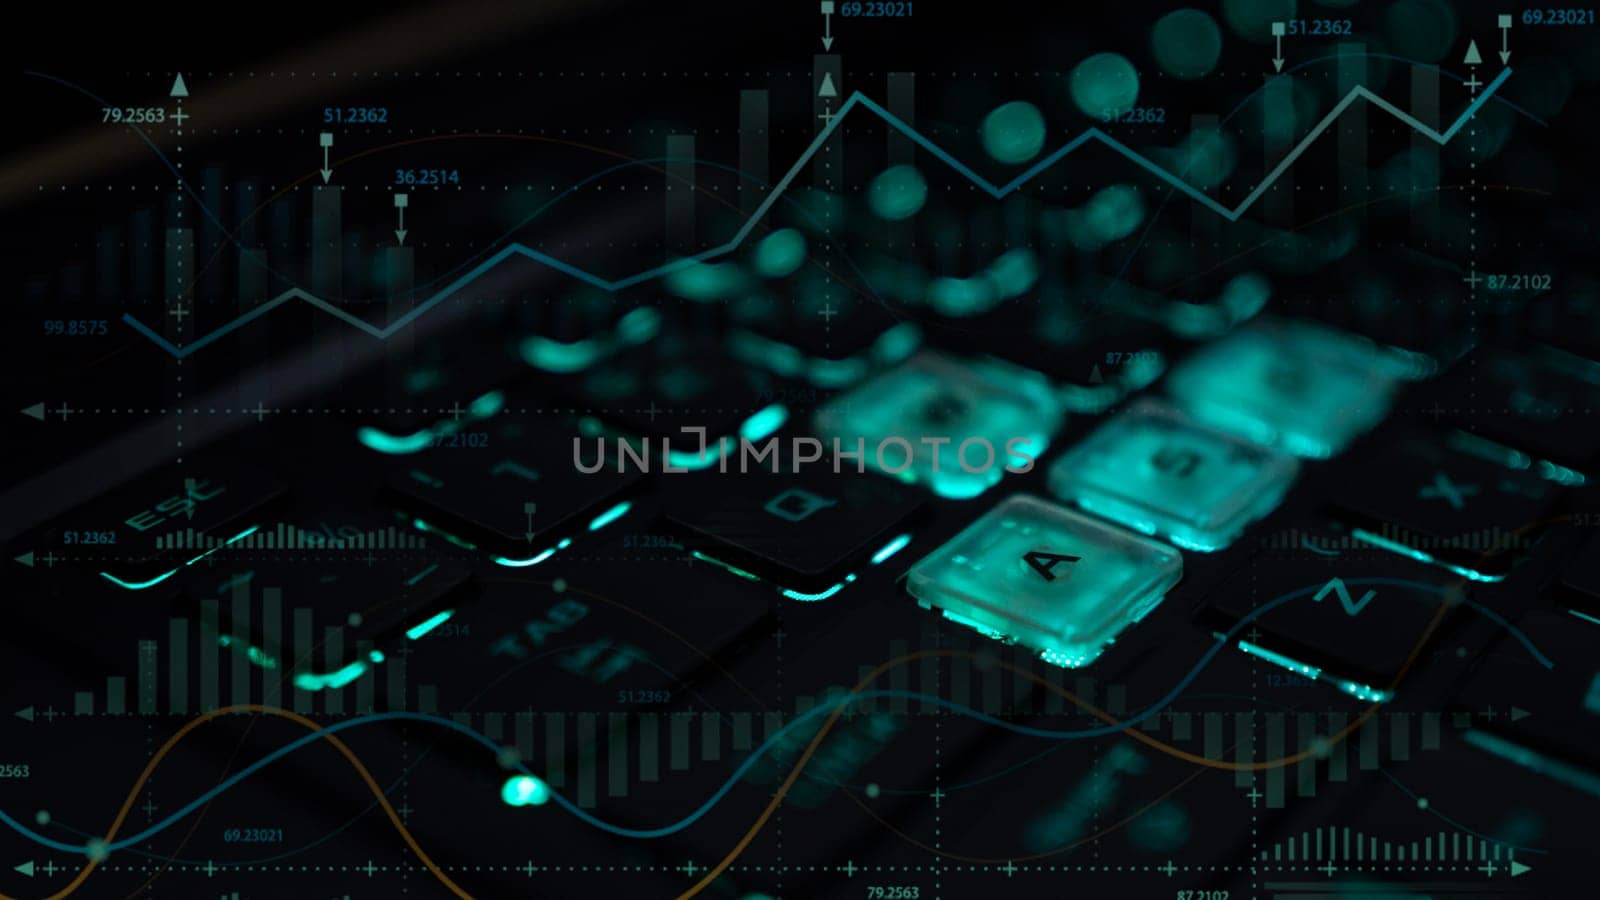 Close-up shot of keyboard with glowing business icons. Concept of business, finance, investment. by Unimages2527